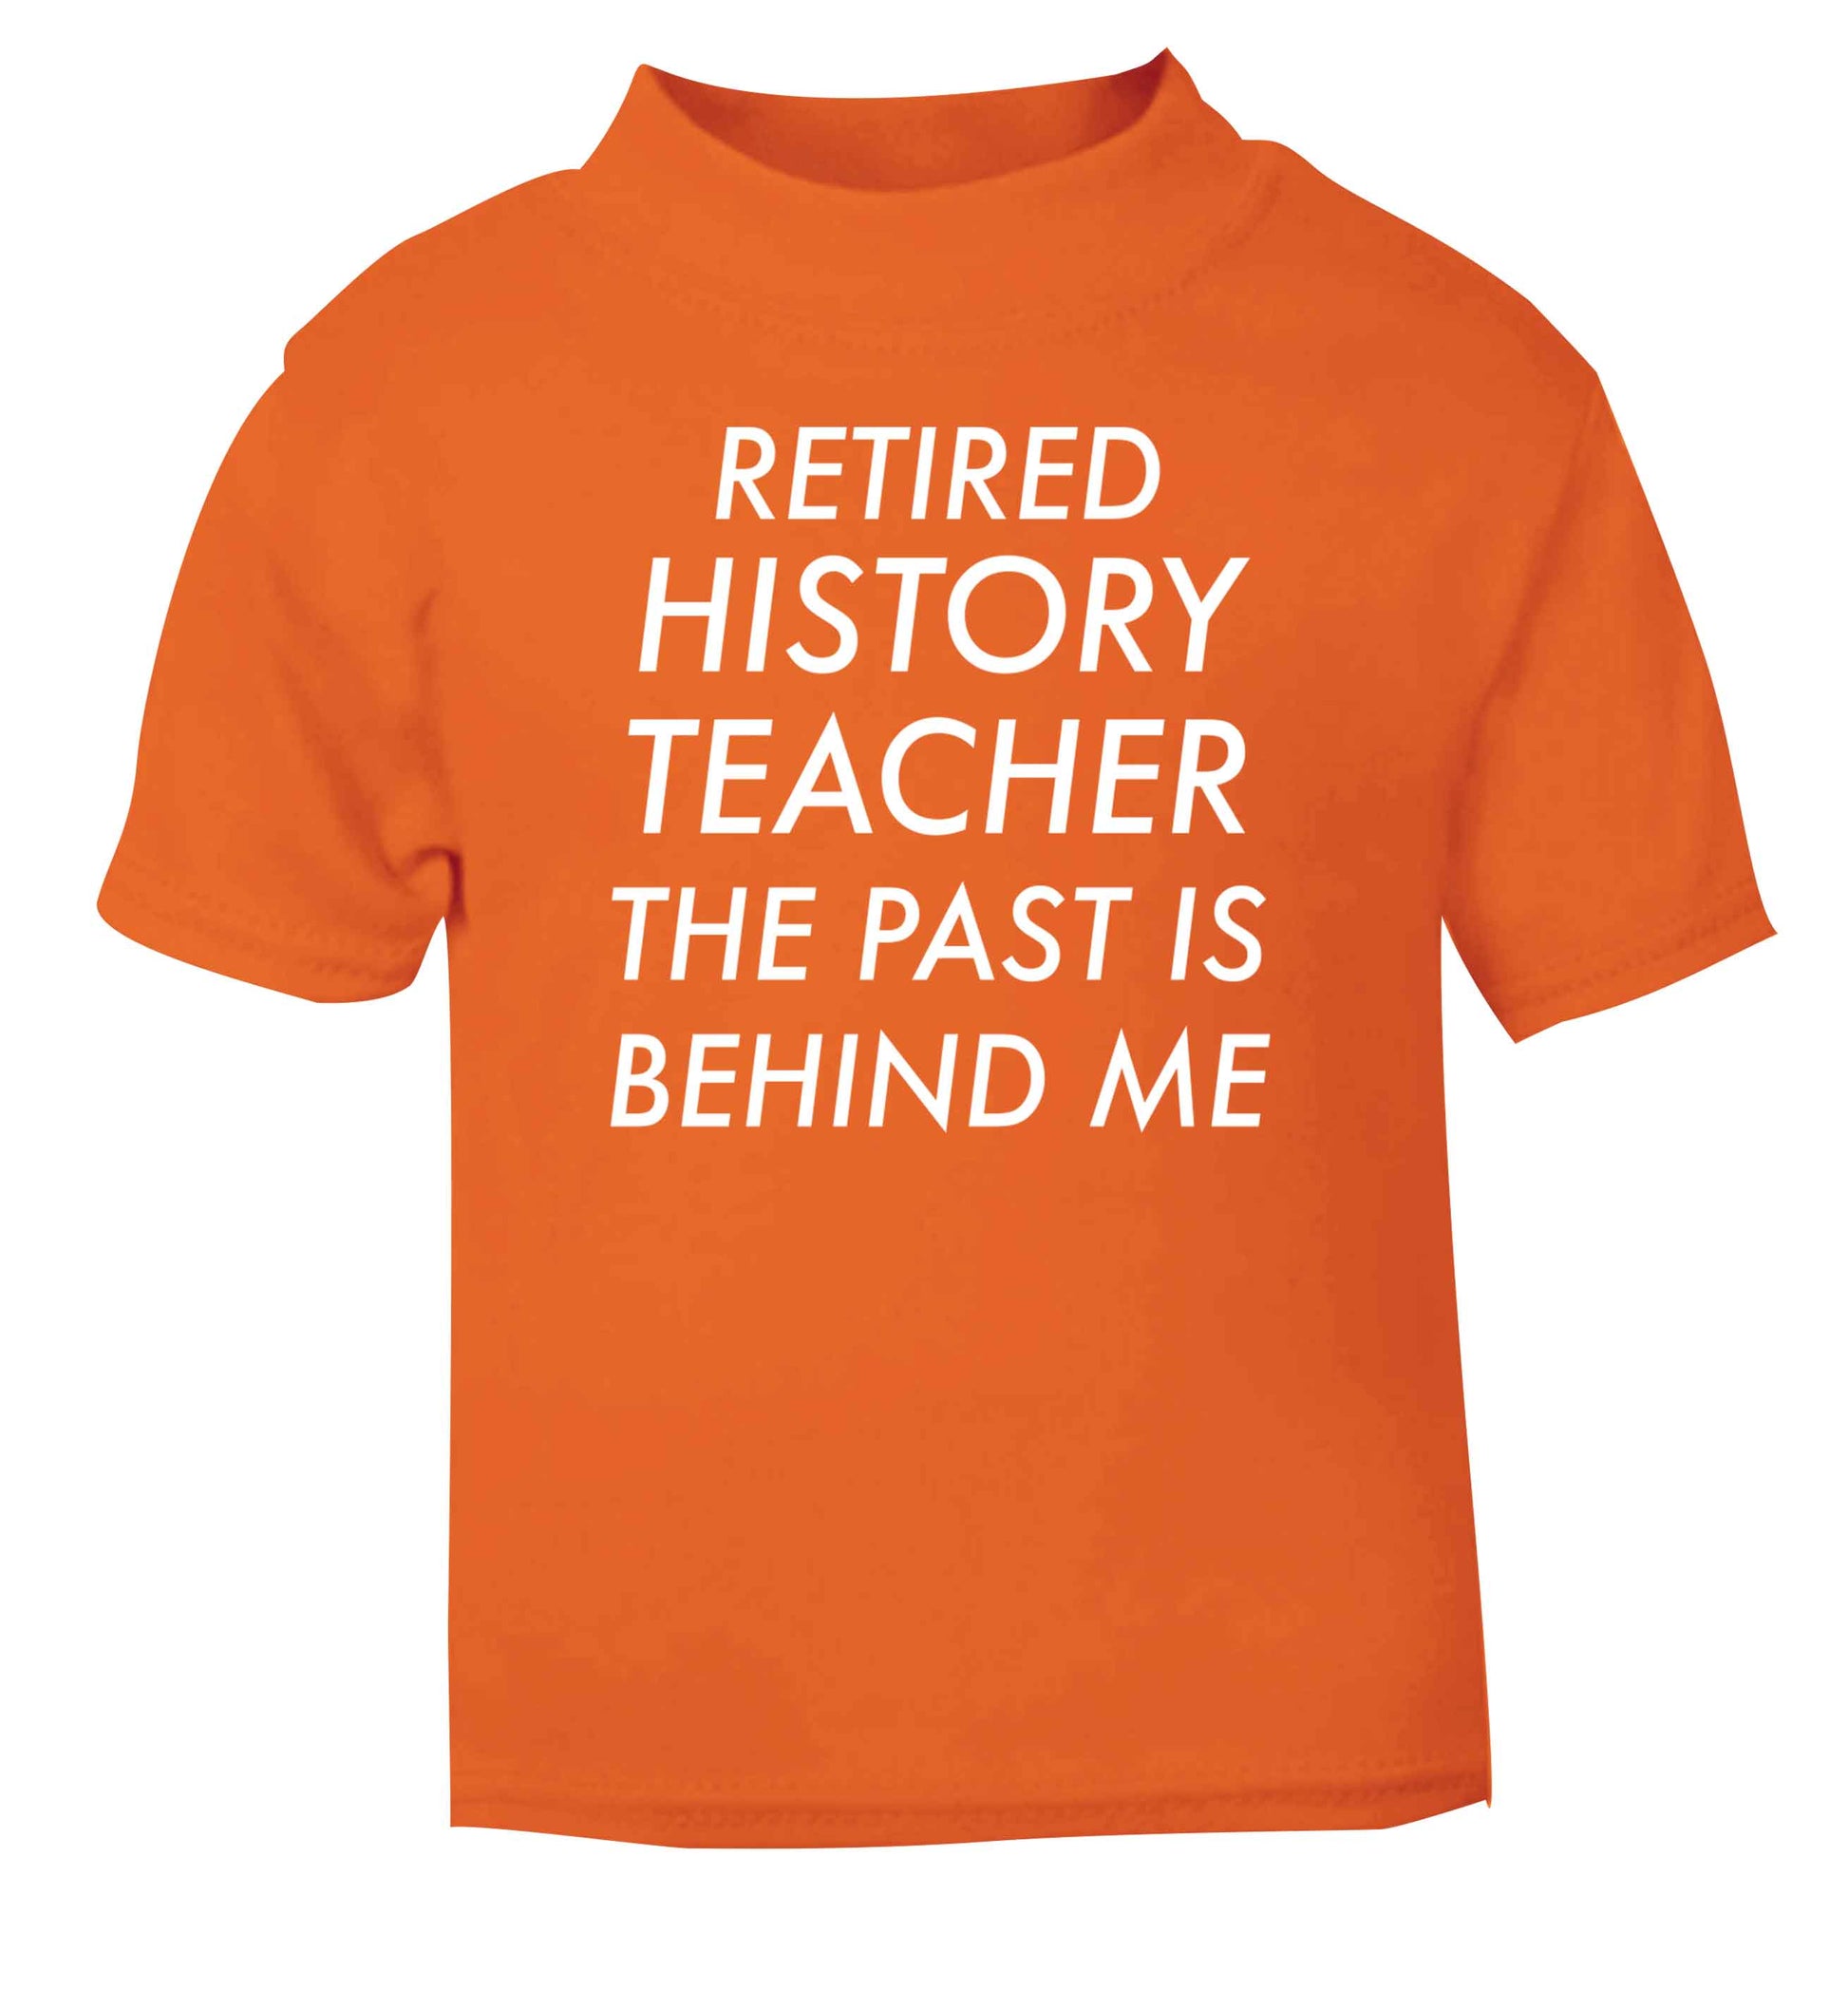 Retired history teacher the past is behind me orange Baby Toddler Tshirt 2 Years